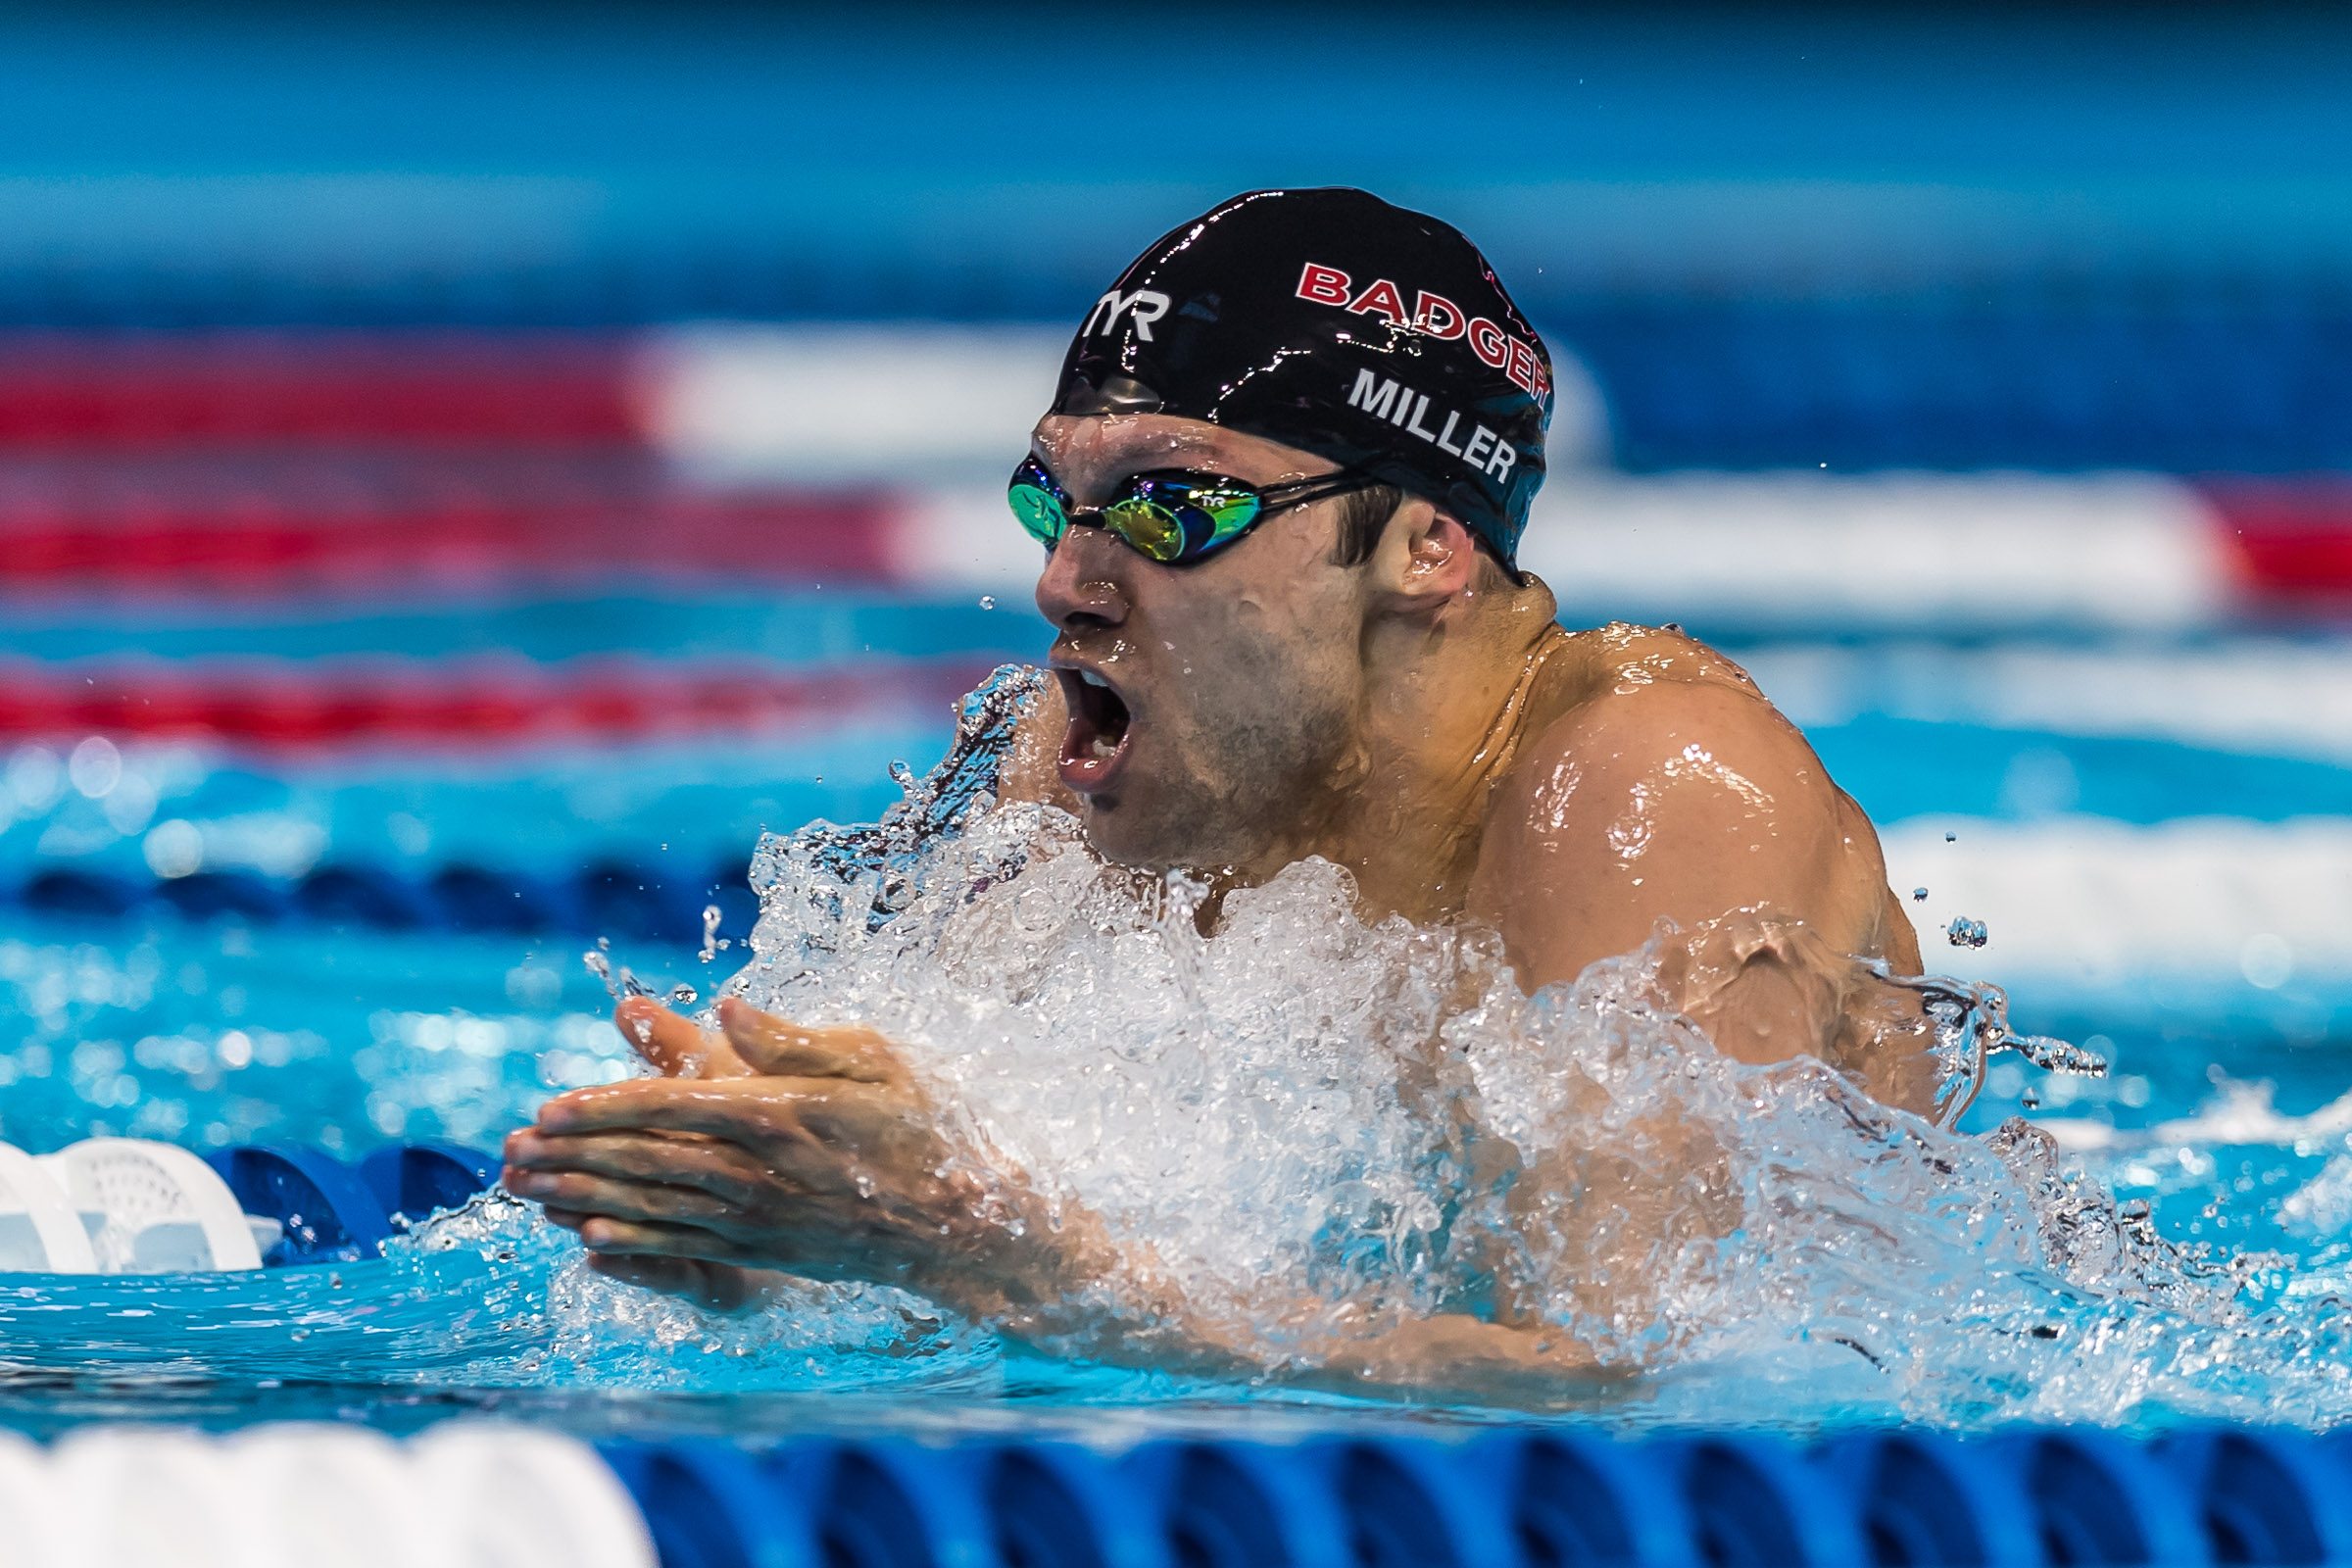 USA Swimming Introduces 2016 Olympic Team: Cody Miller